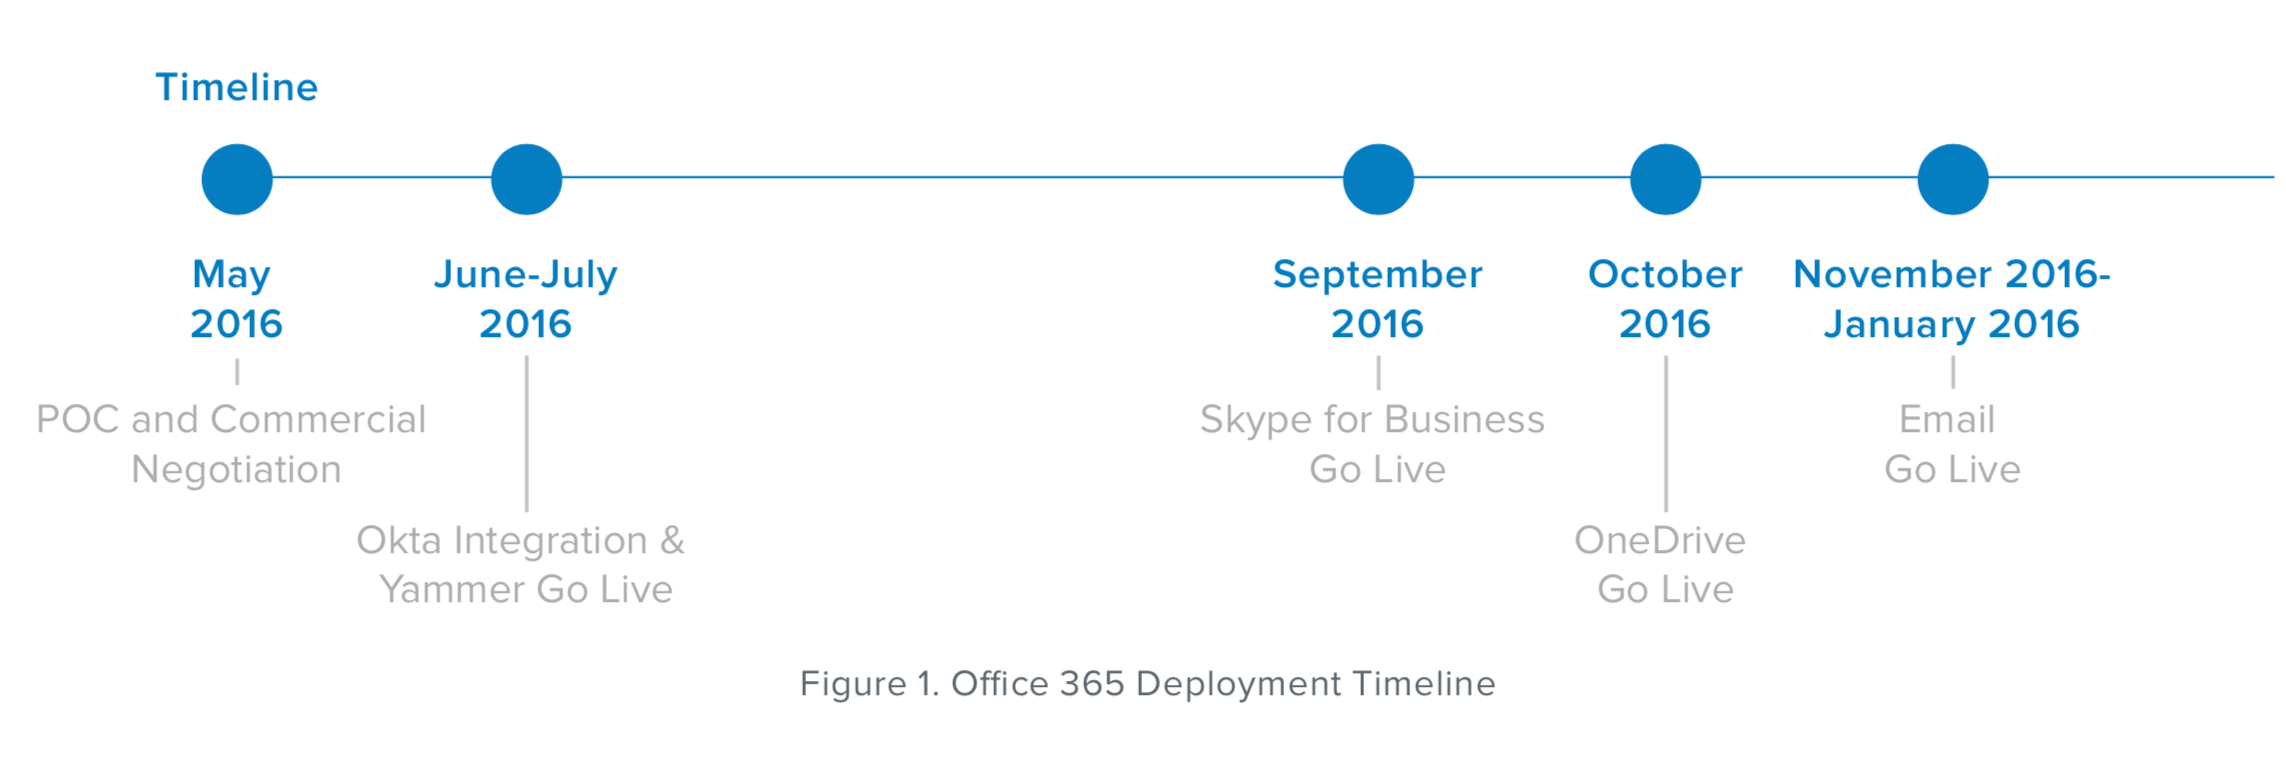 The Office 365 Deployment timeline